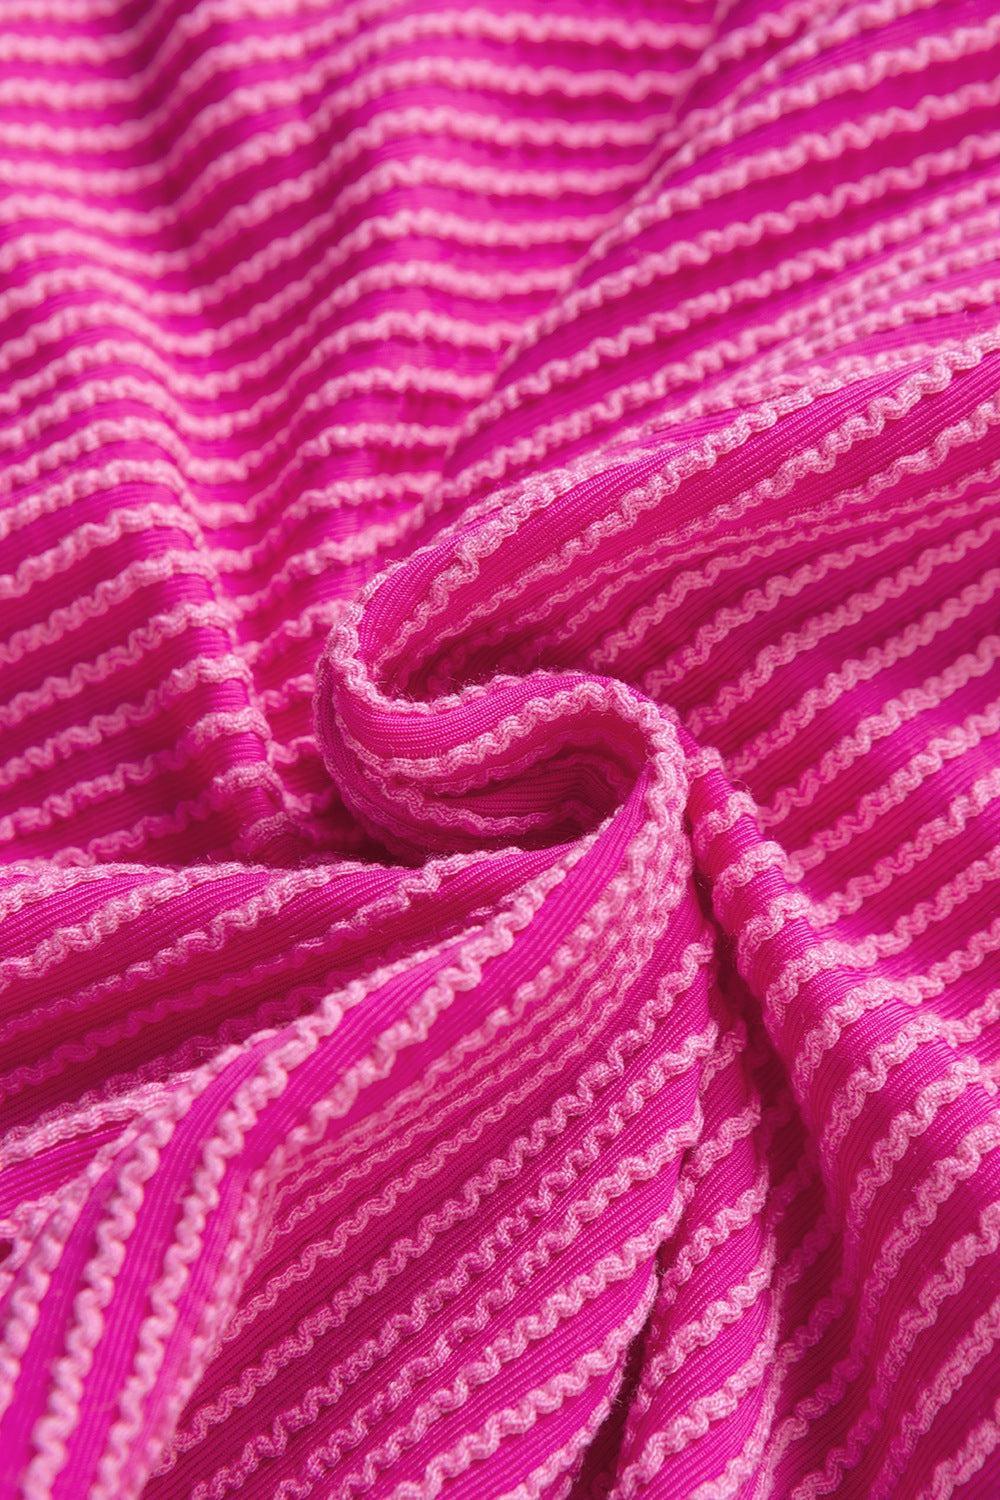 a close up of a pink and white knitted blanket